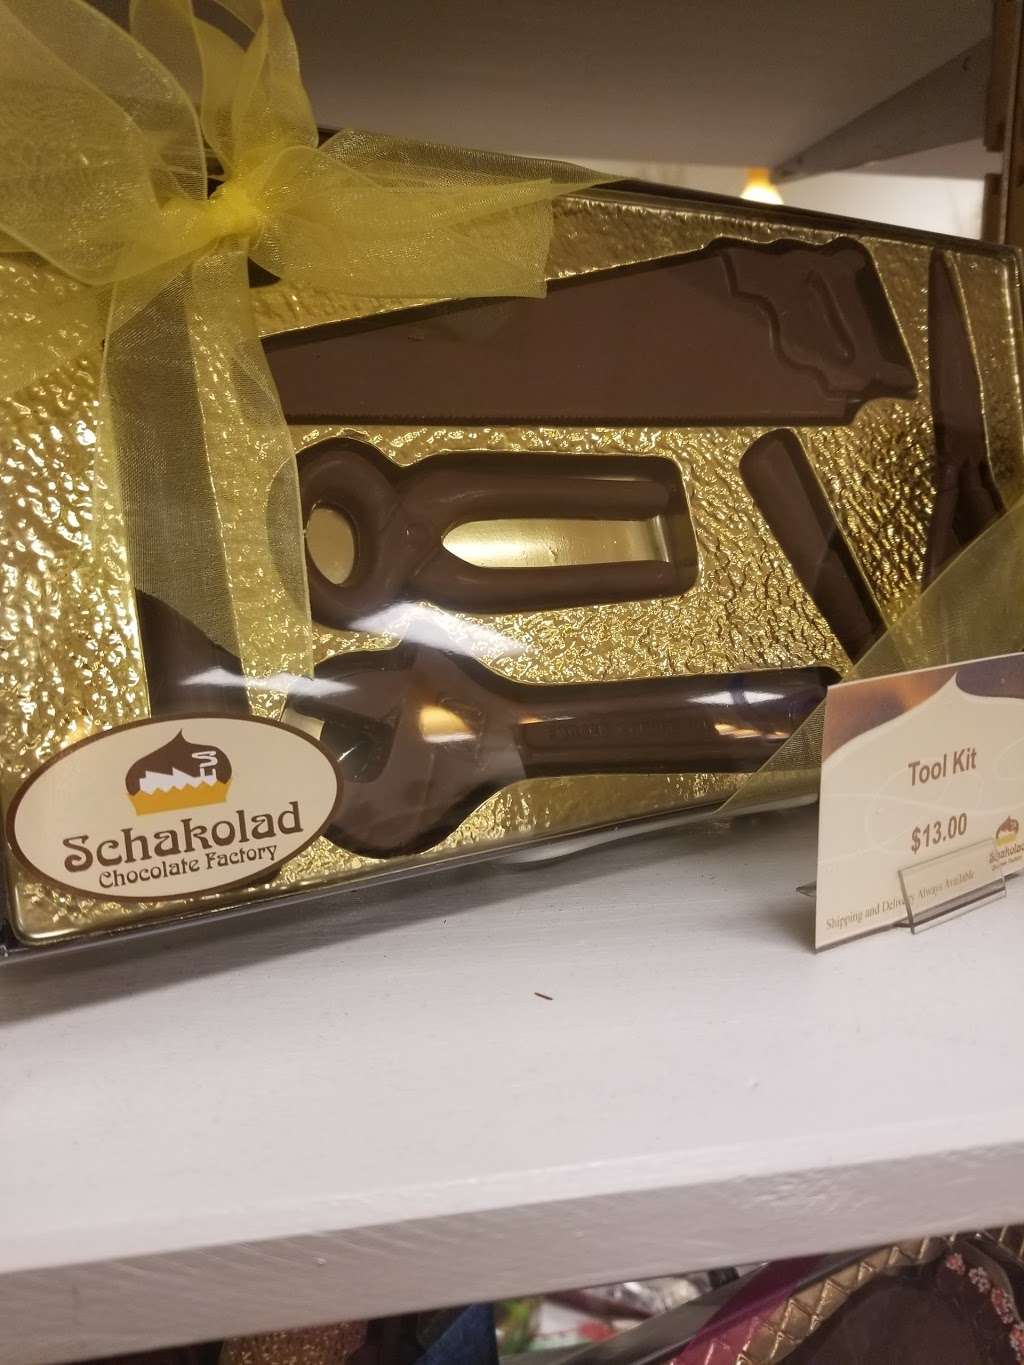 Schakolad Chocolate Factory | 6010 W 86th St #136, Indianapolis, IN 46278 | Phone: (317) 872-9000